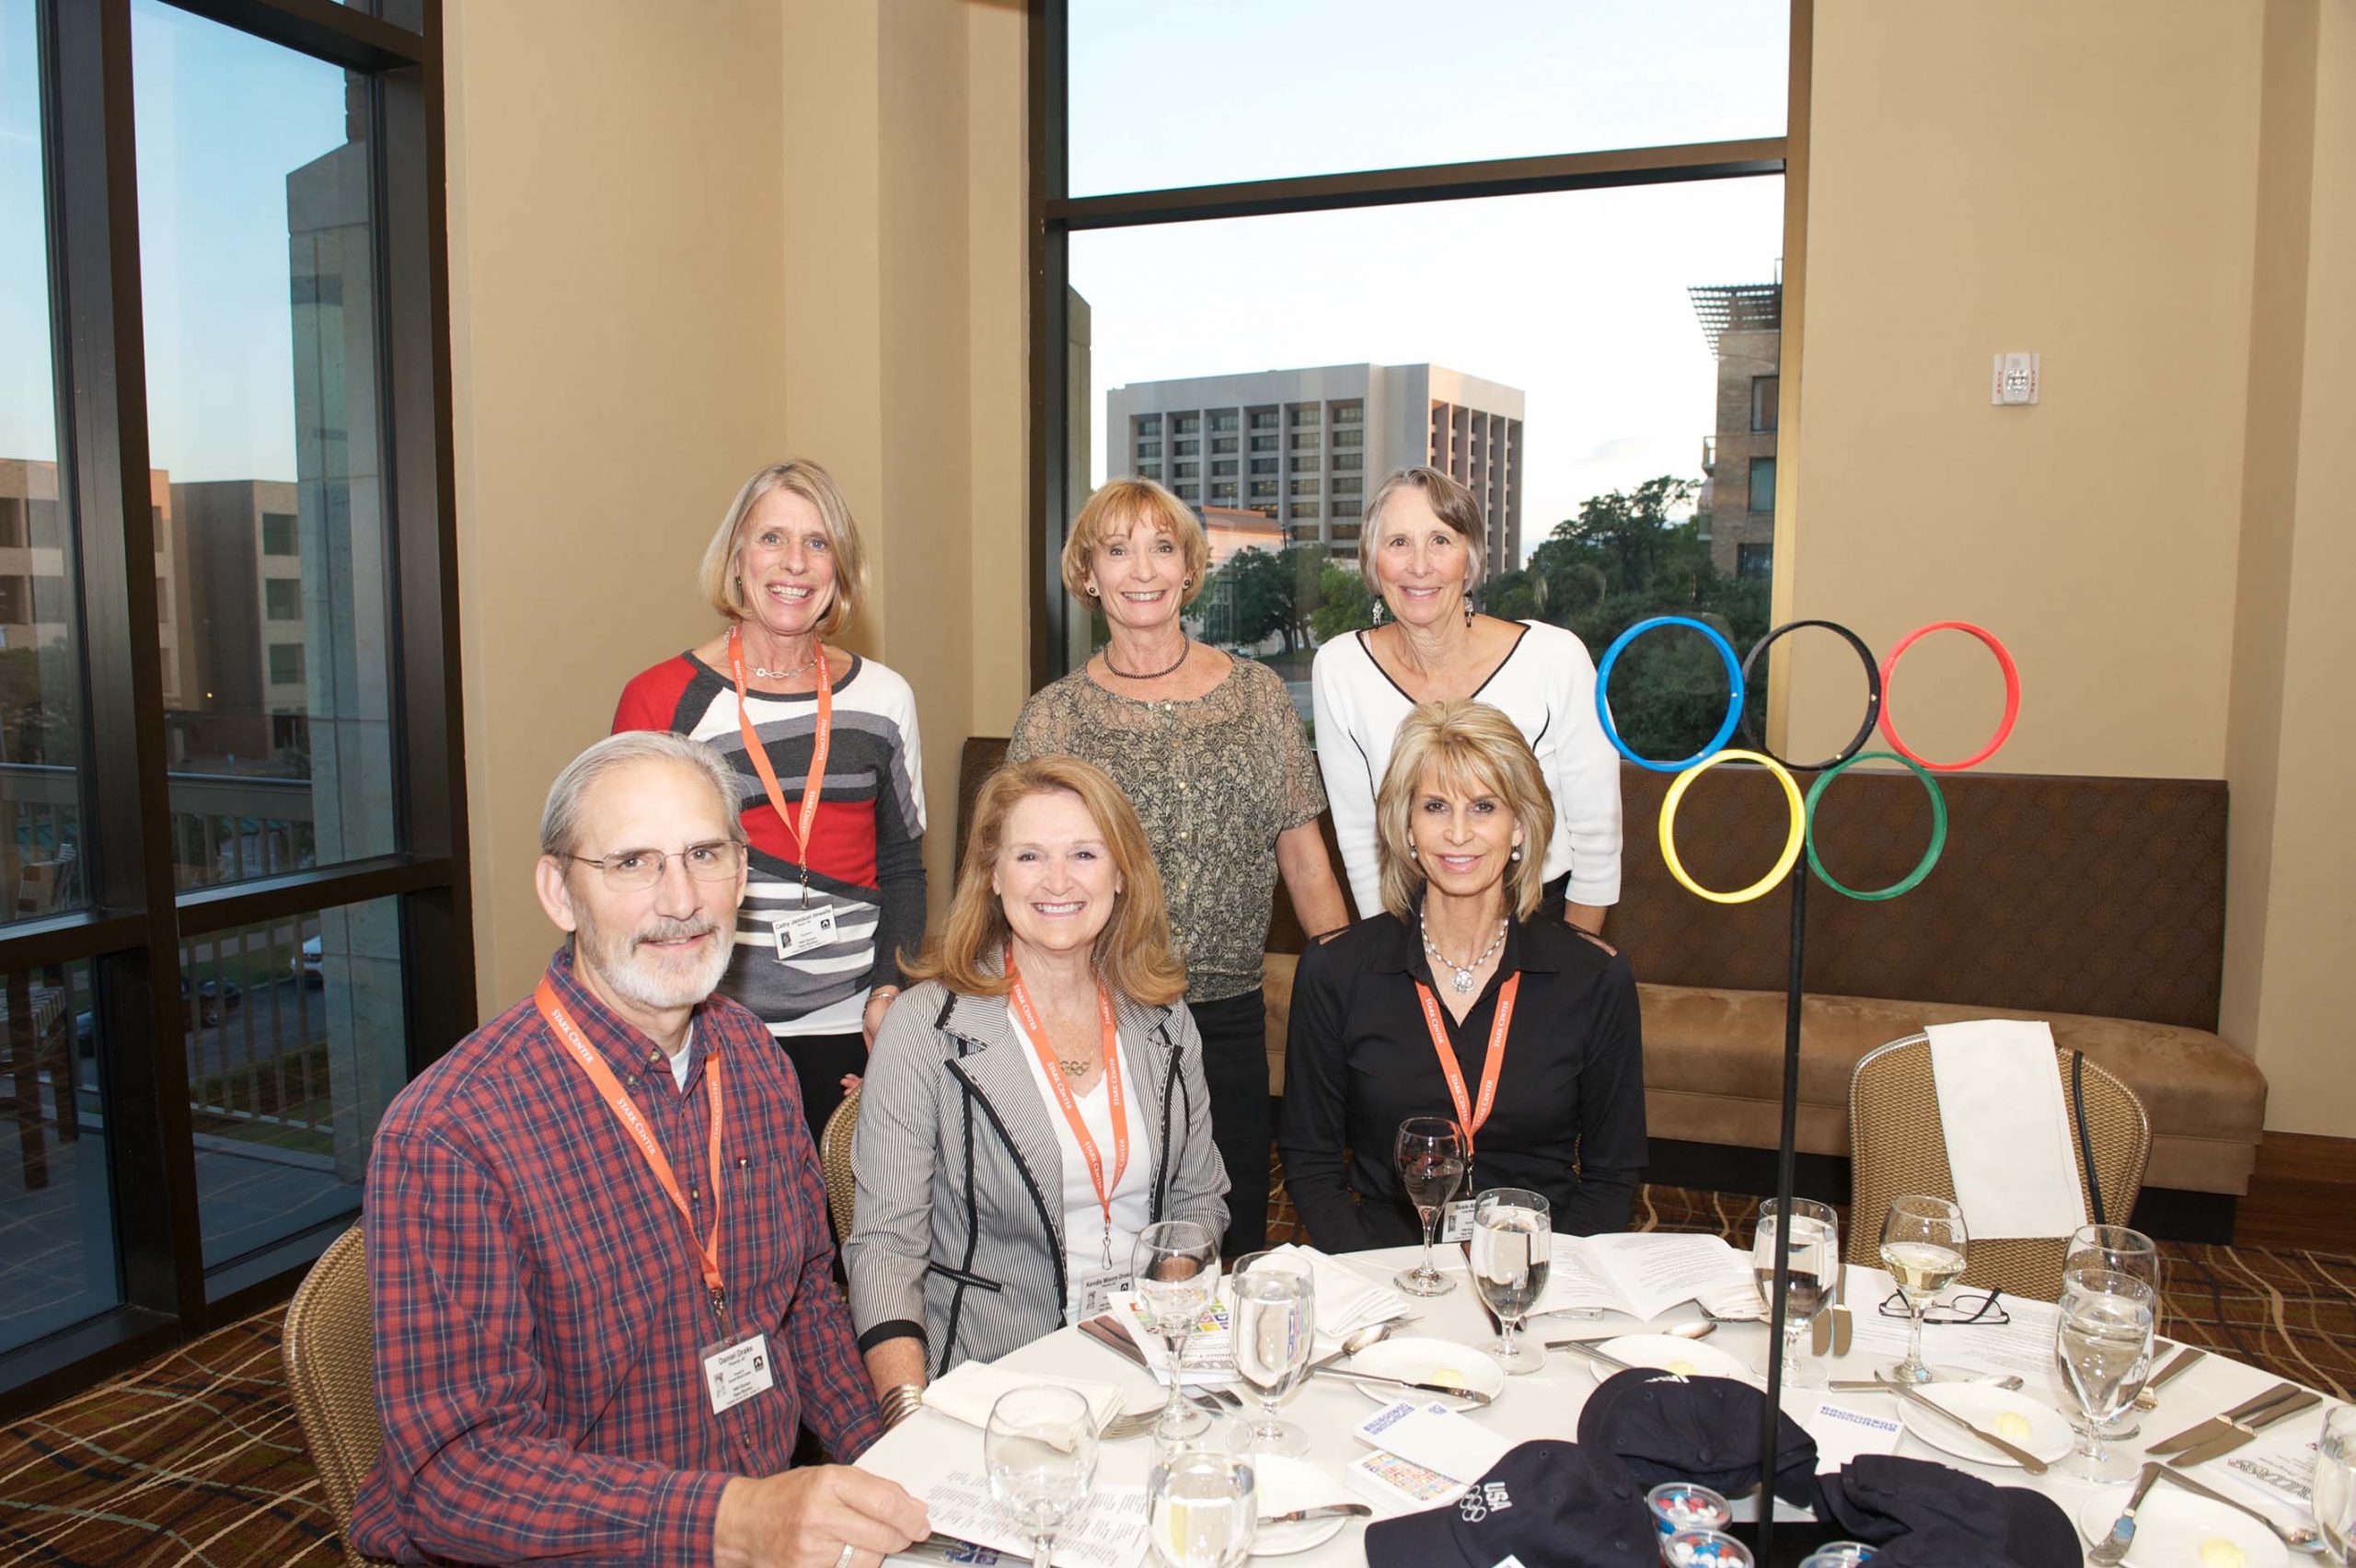 Six people at a table at the 1968 U.S. Olympic Team 2012 Reunion.